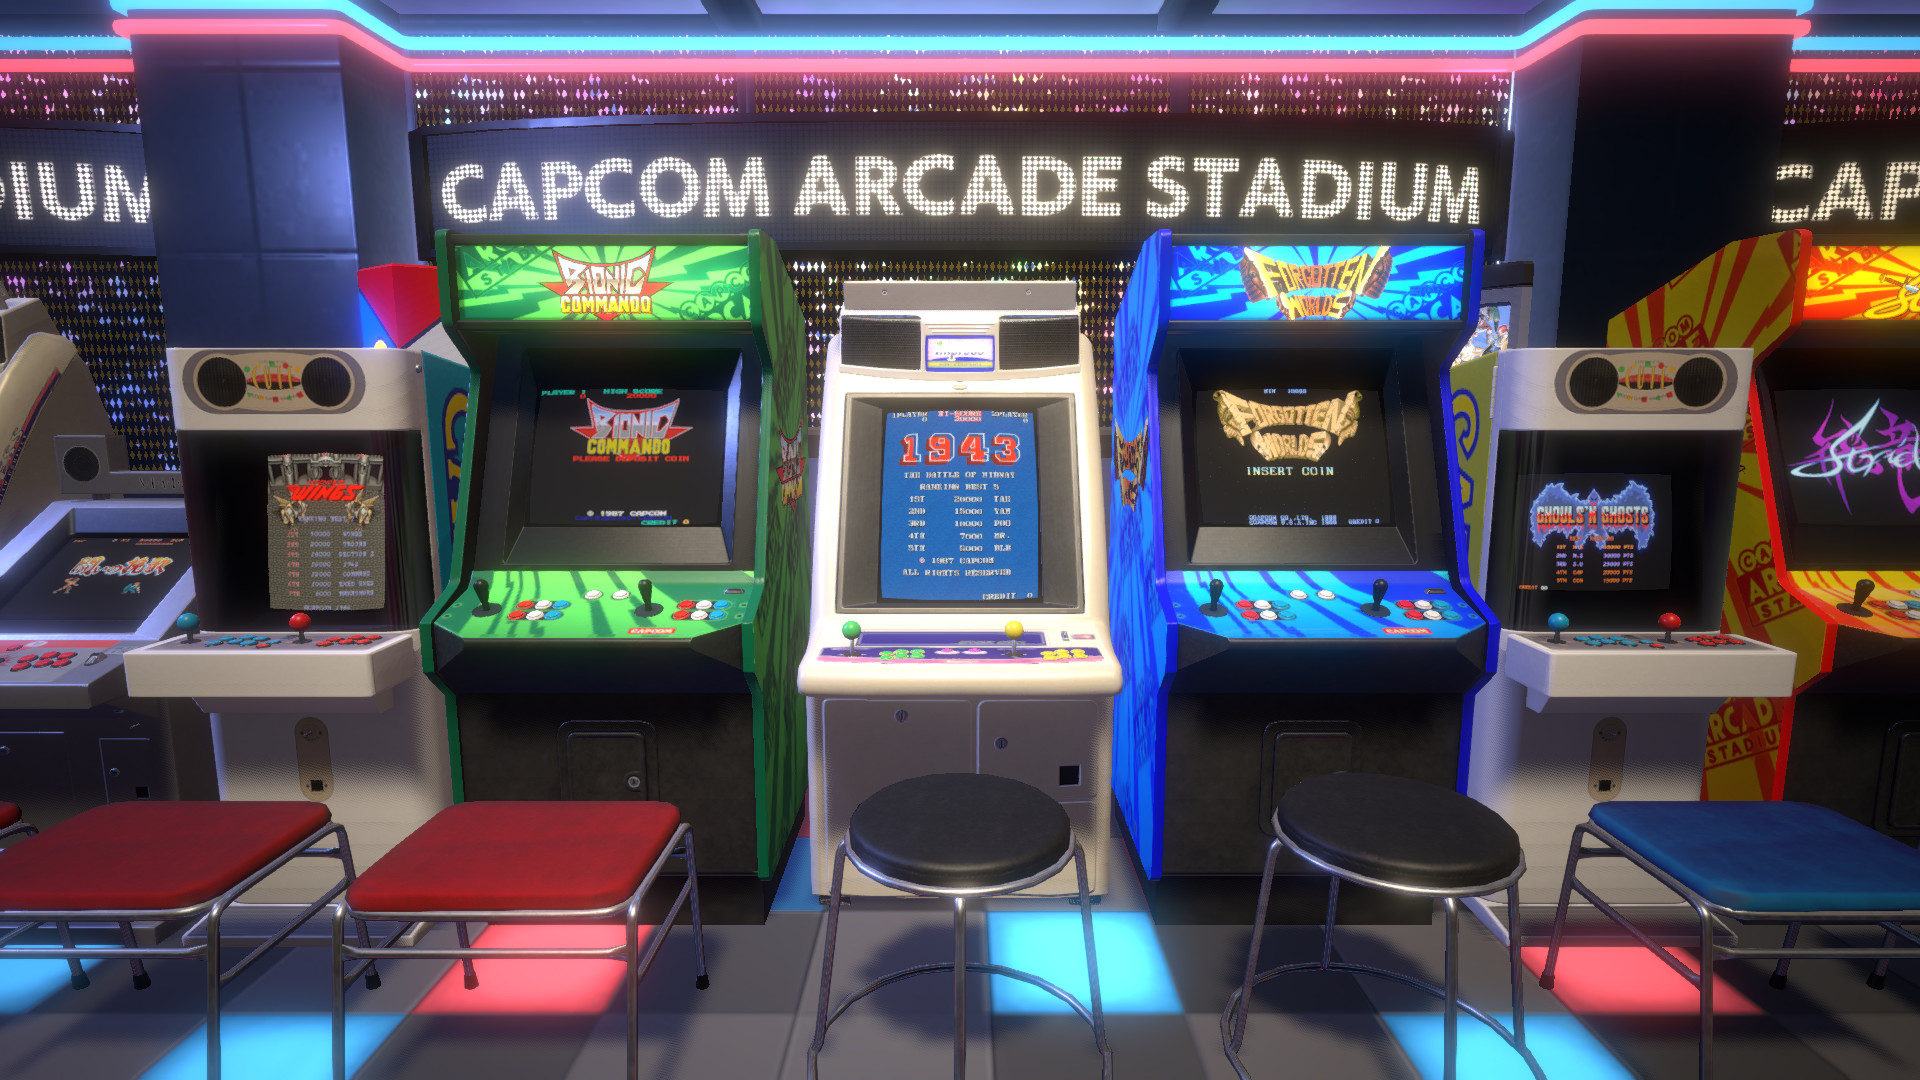 Capcom's arcade emulation collection is the eighth-biggest Steam game of all time